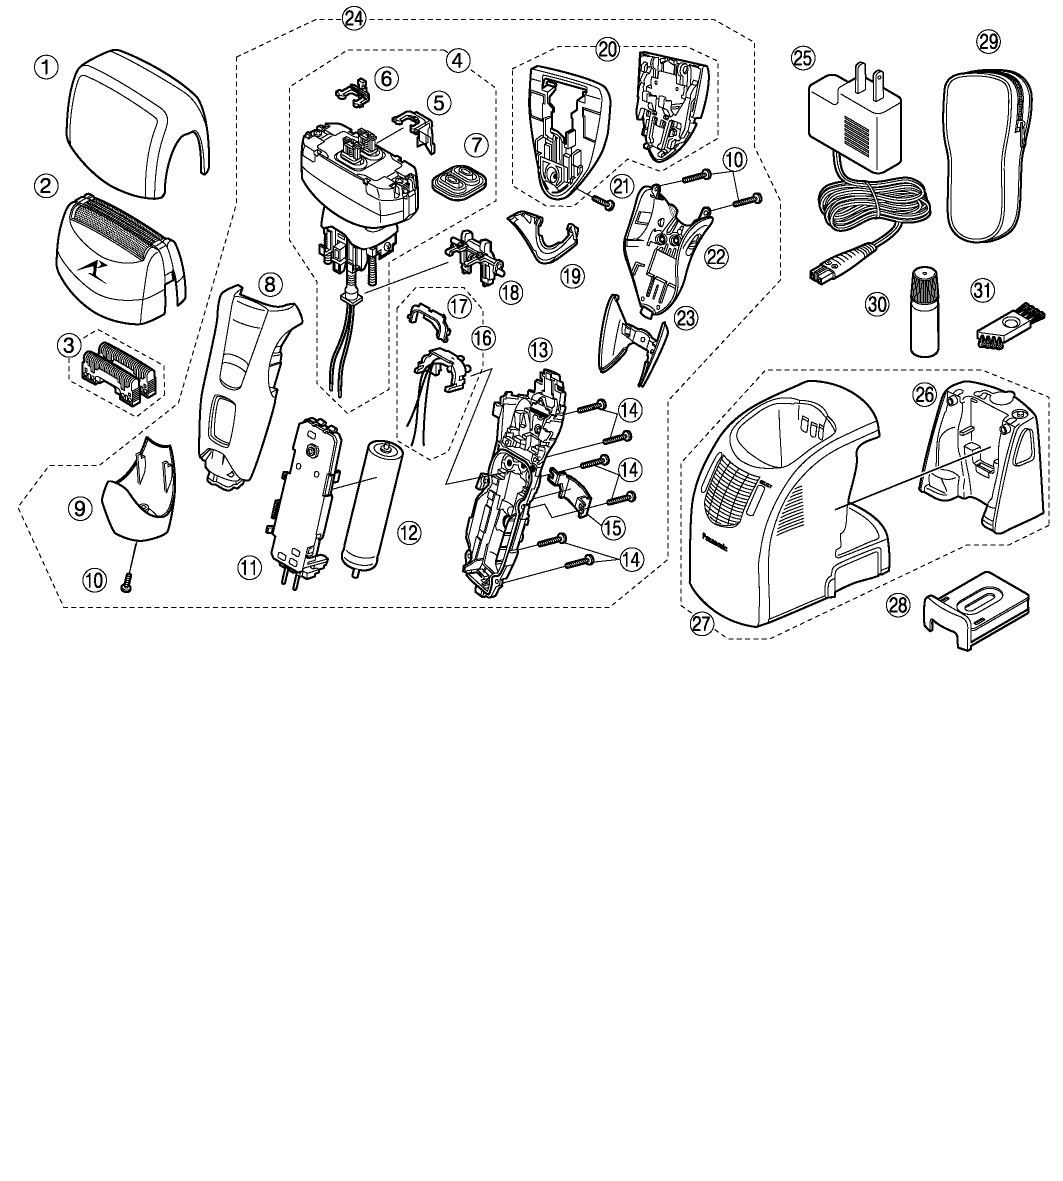 ES-8238: Exploded View